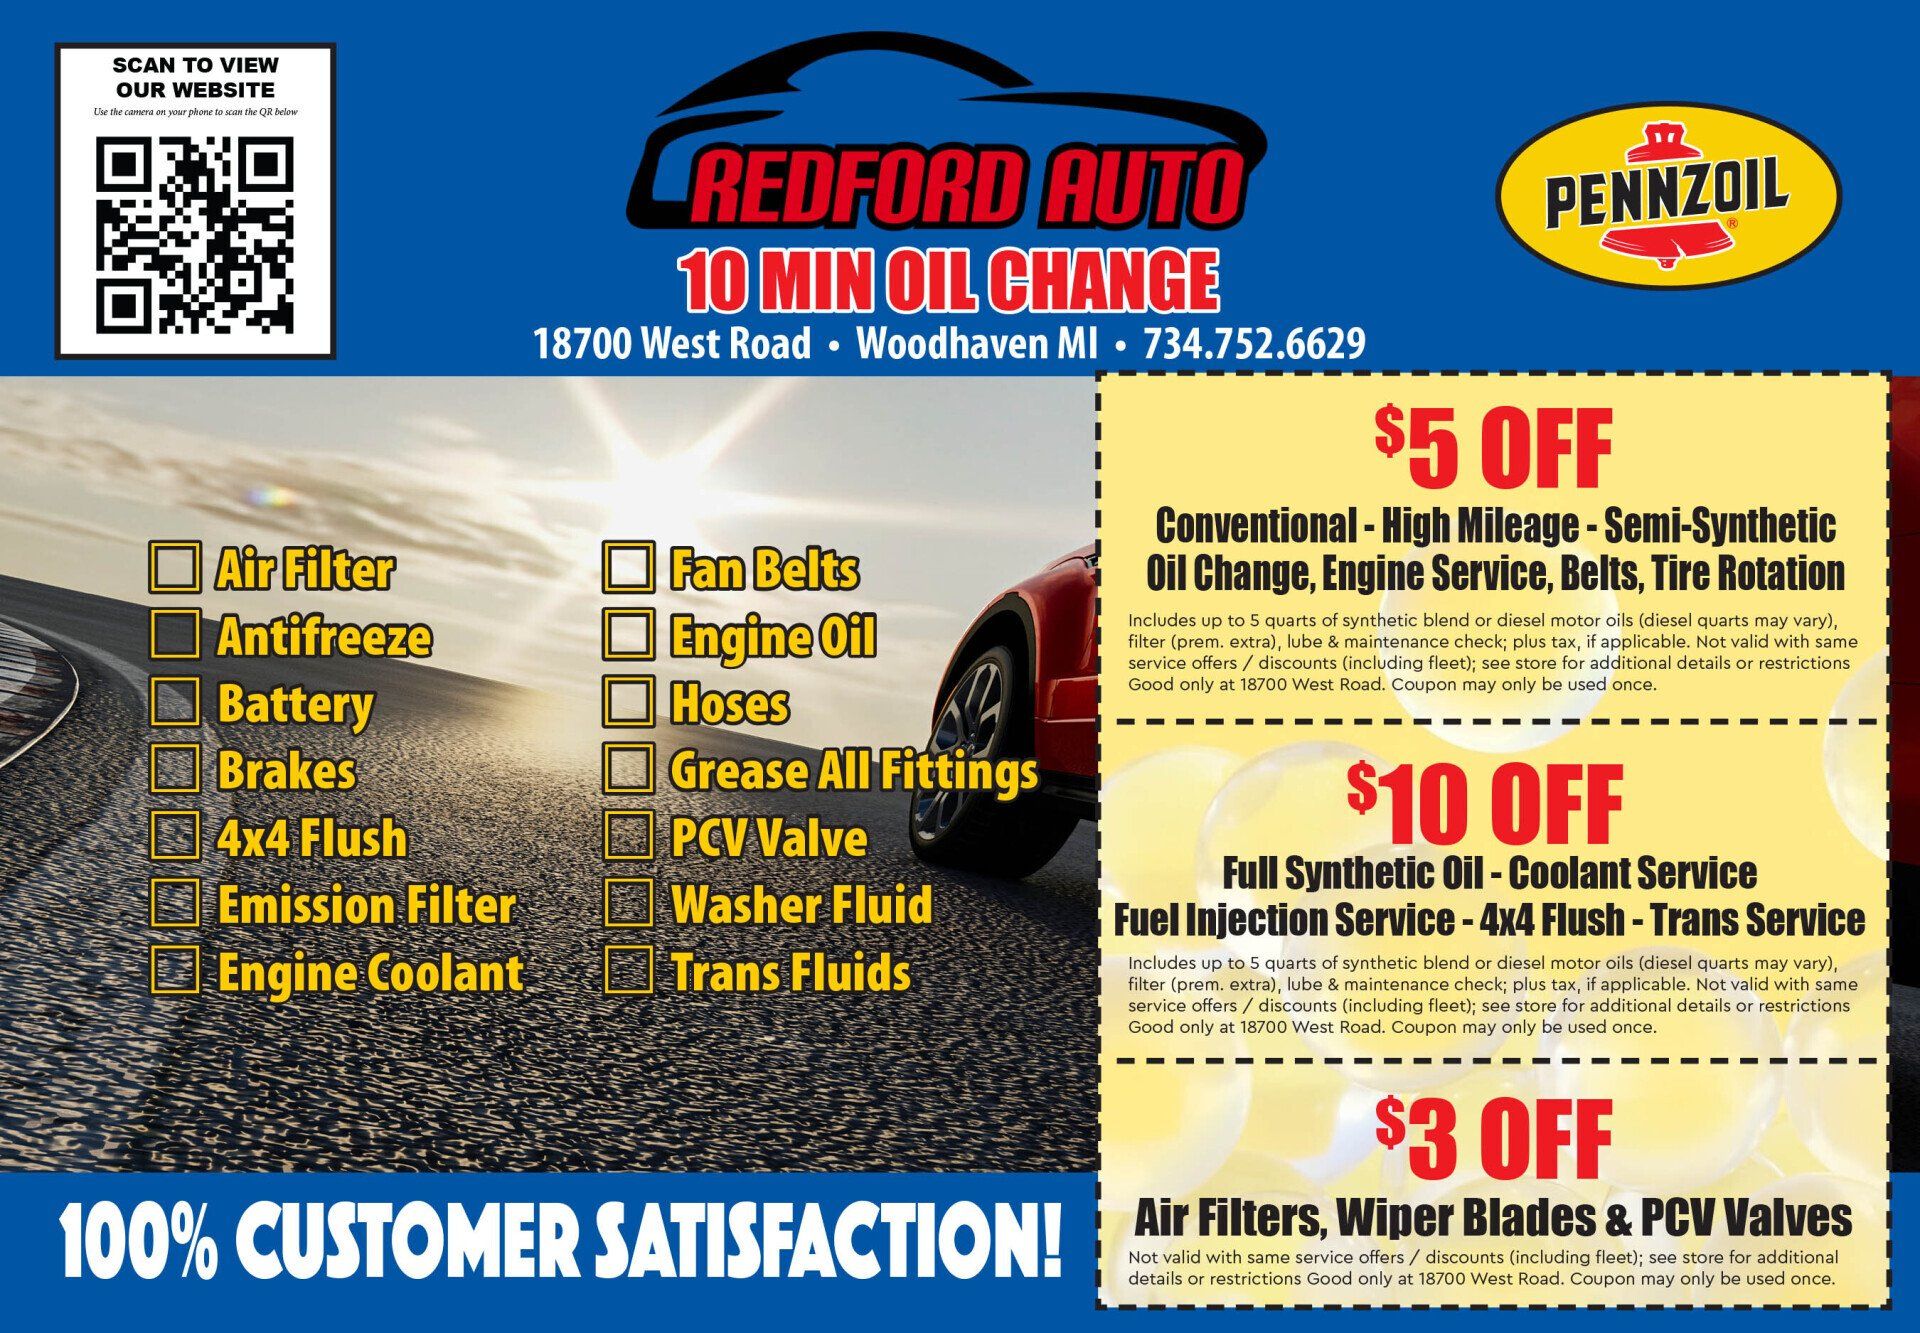 A coupon for redford auto that says 10 min oil change